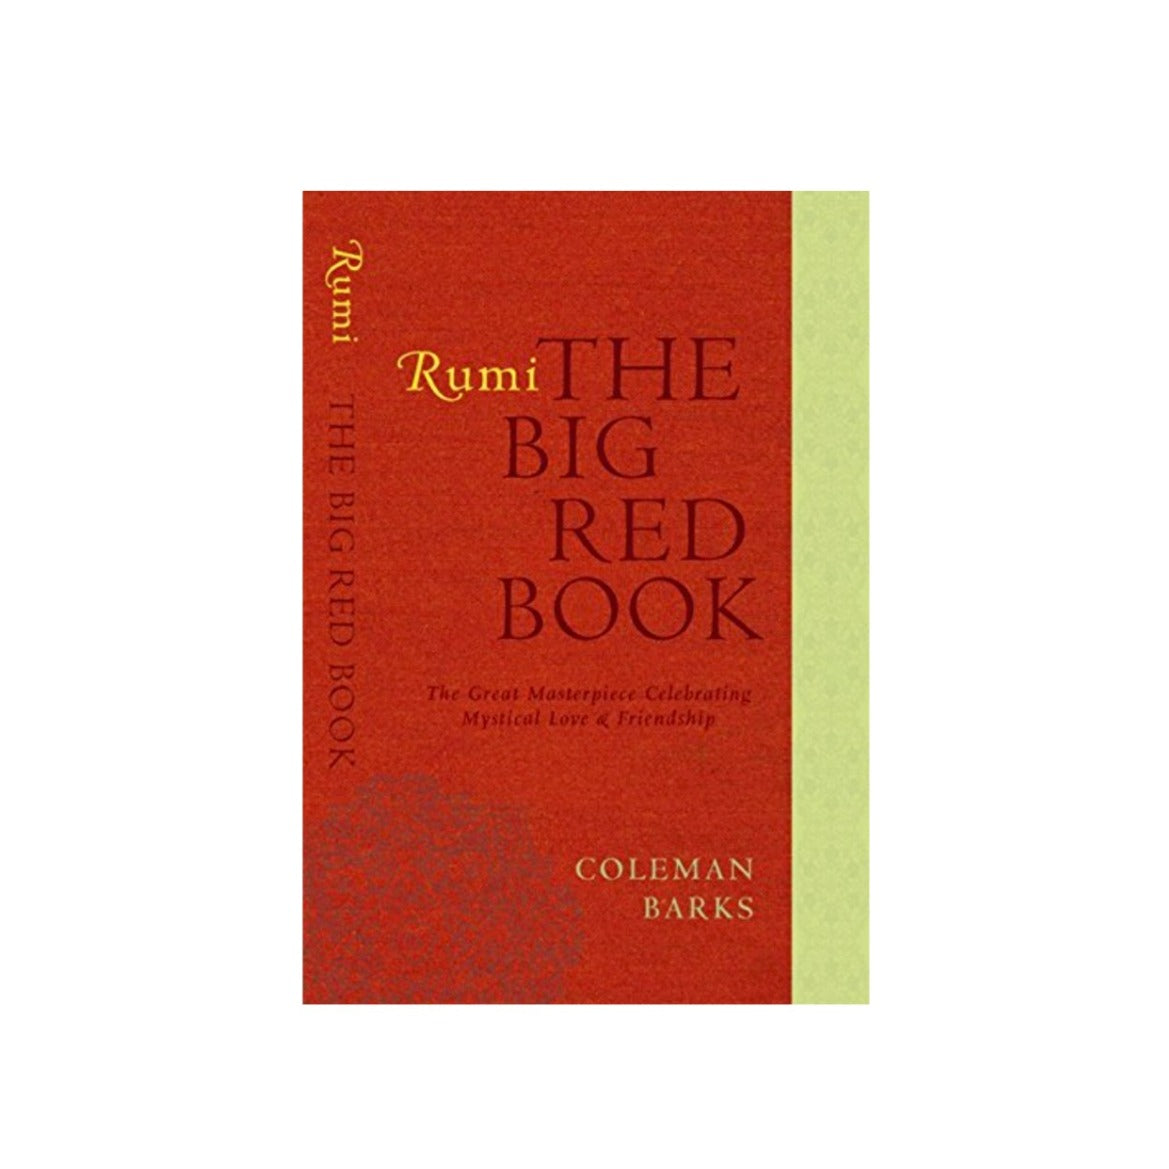 Rumi: The Big Red Book by Rumi